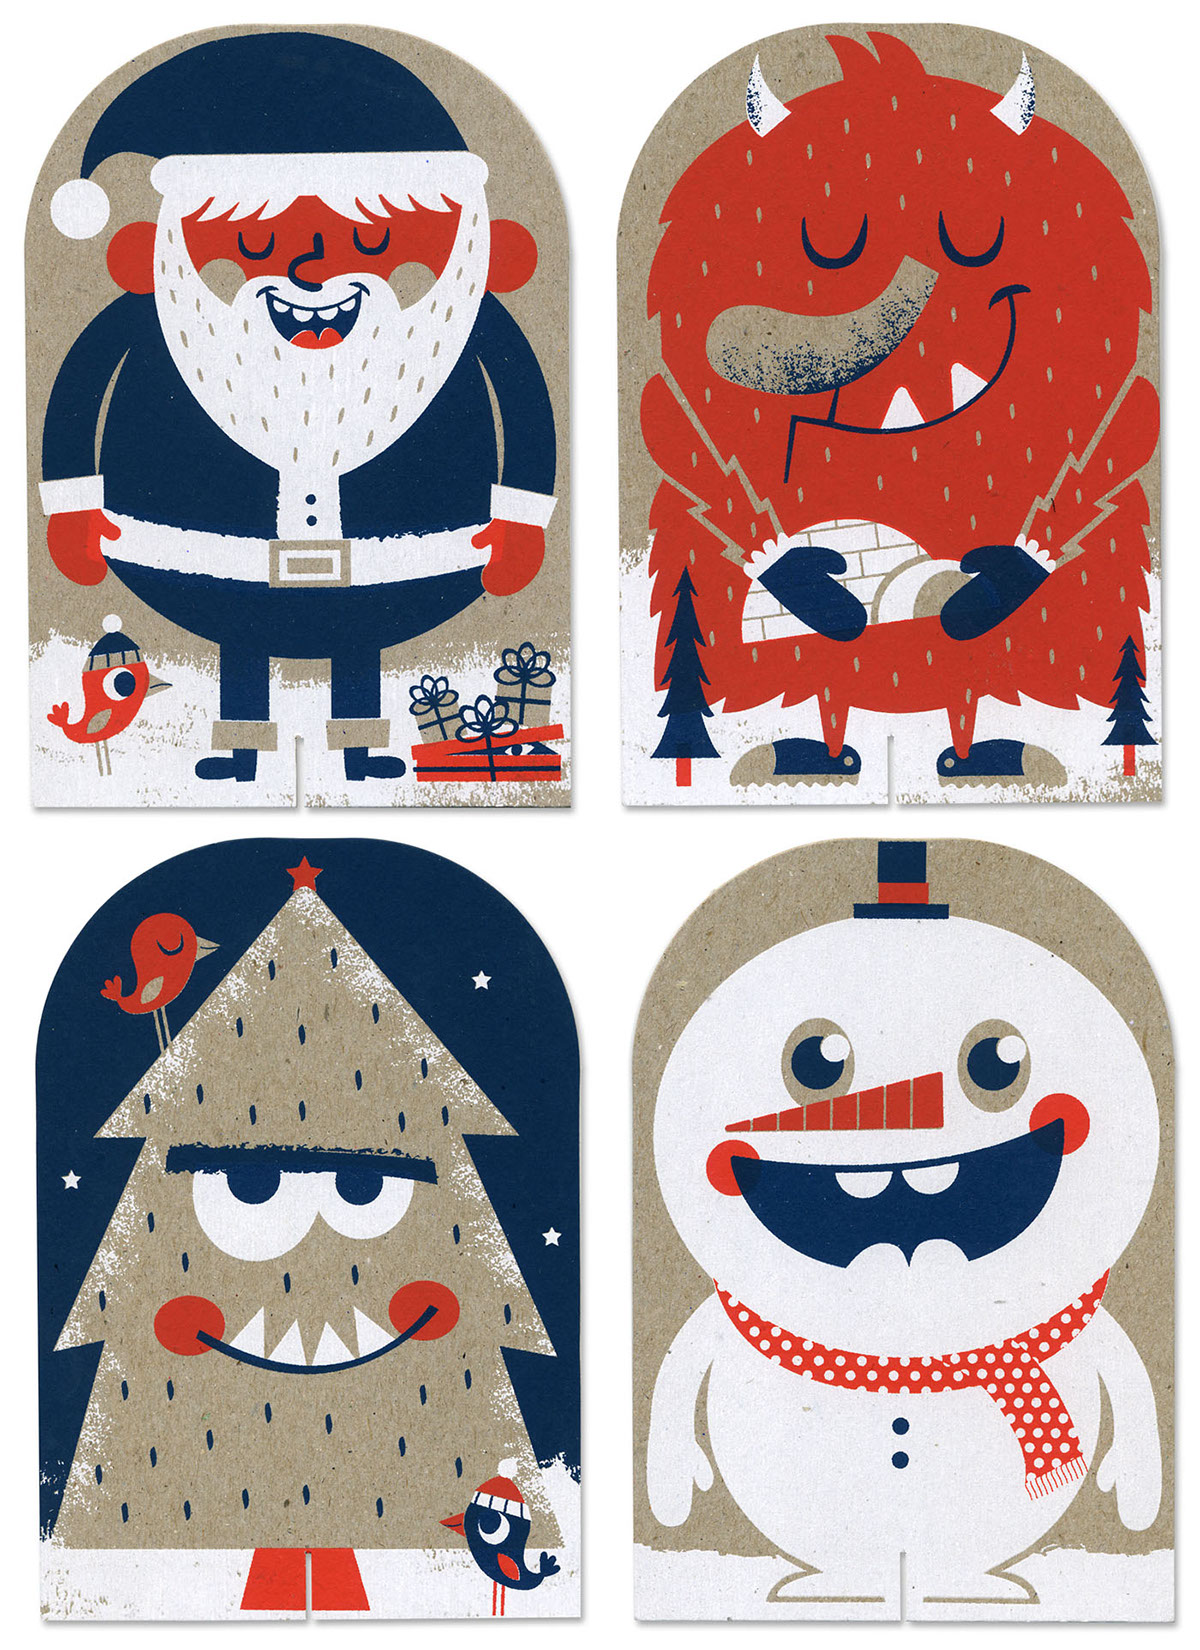 Christmas holidays tad carpenter christmas cards Happy Holidays Tad Carpenter Creative santa reindeer snowman holiday cards  holiday goods stationary greeting cards board game silk screen